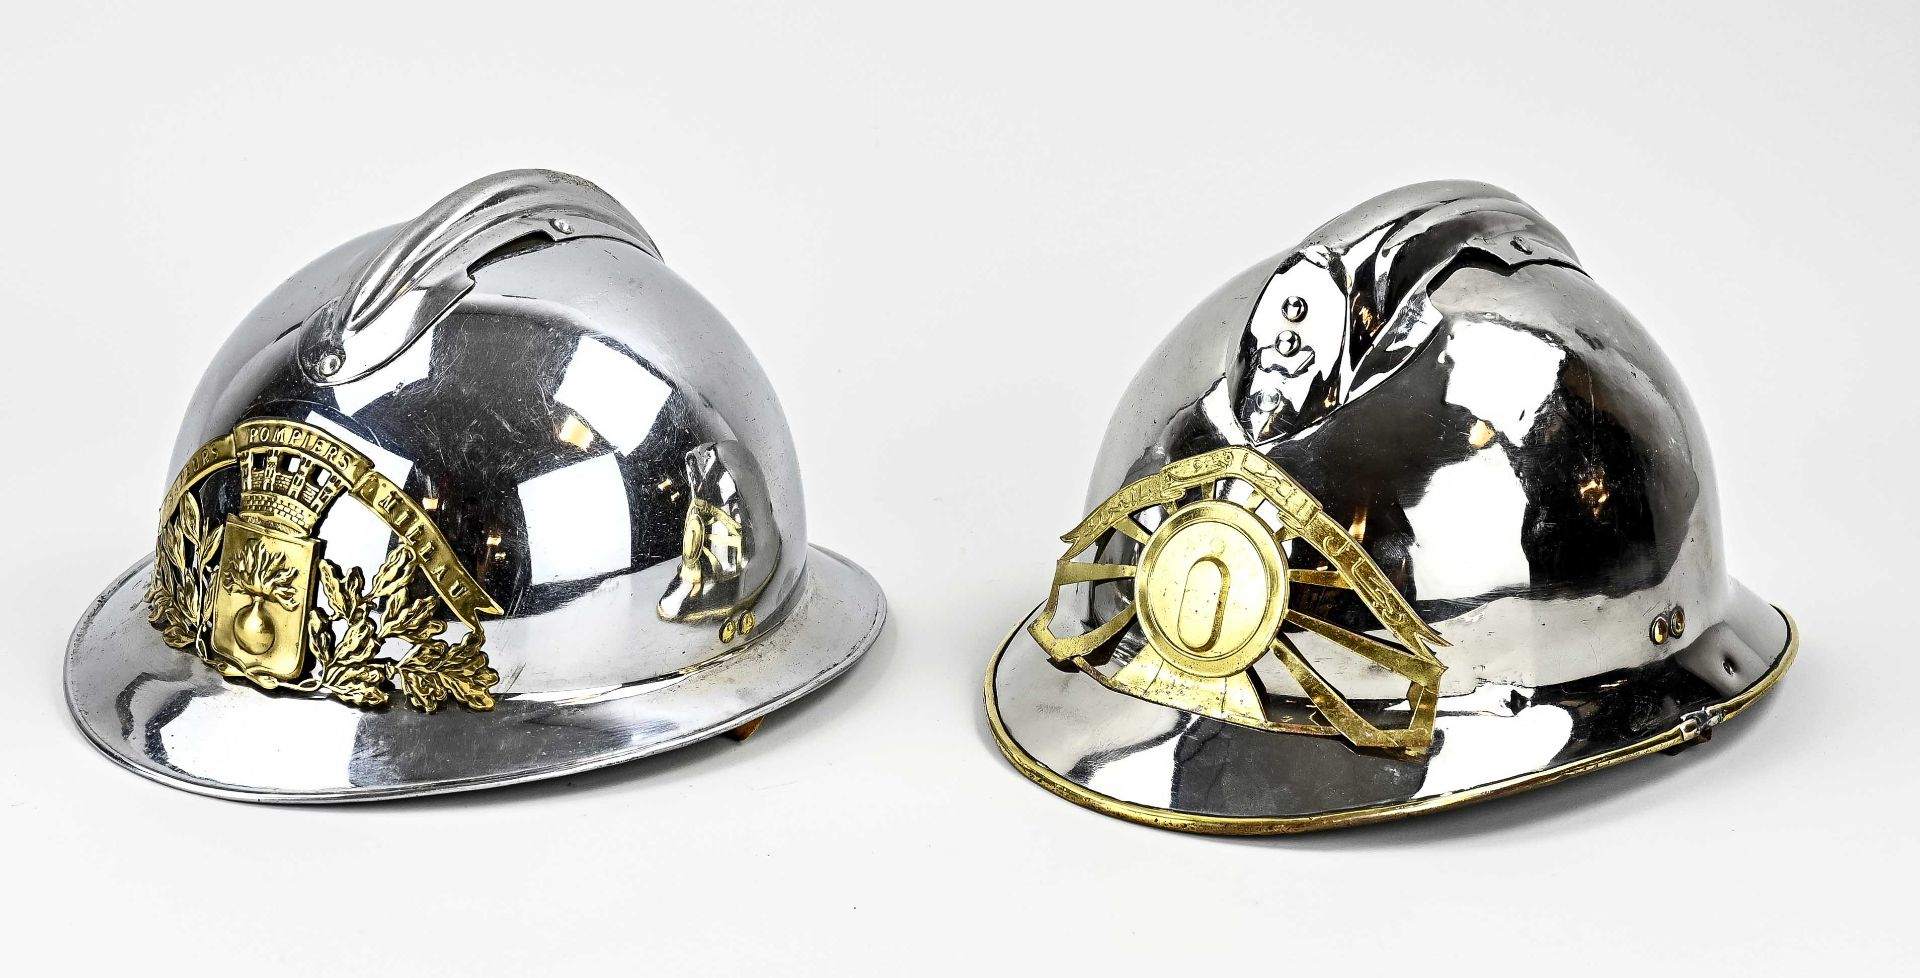 Two antique Japanese fire helmets